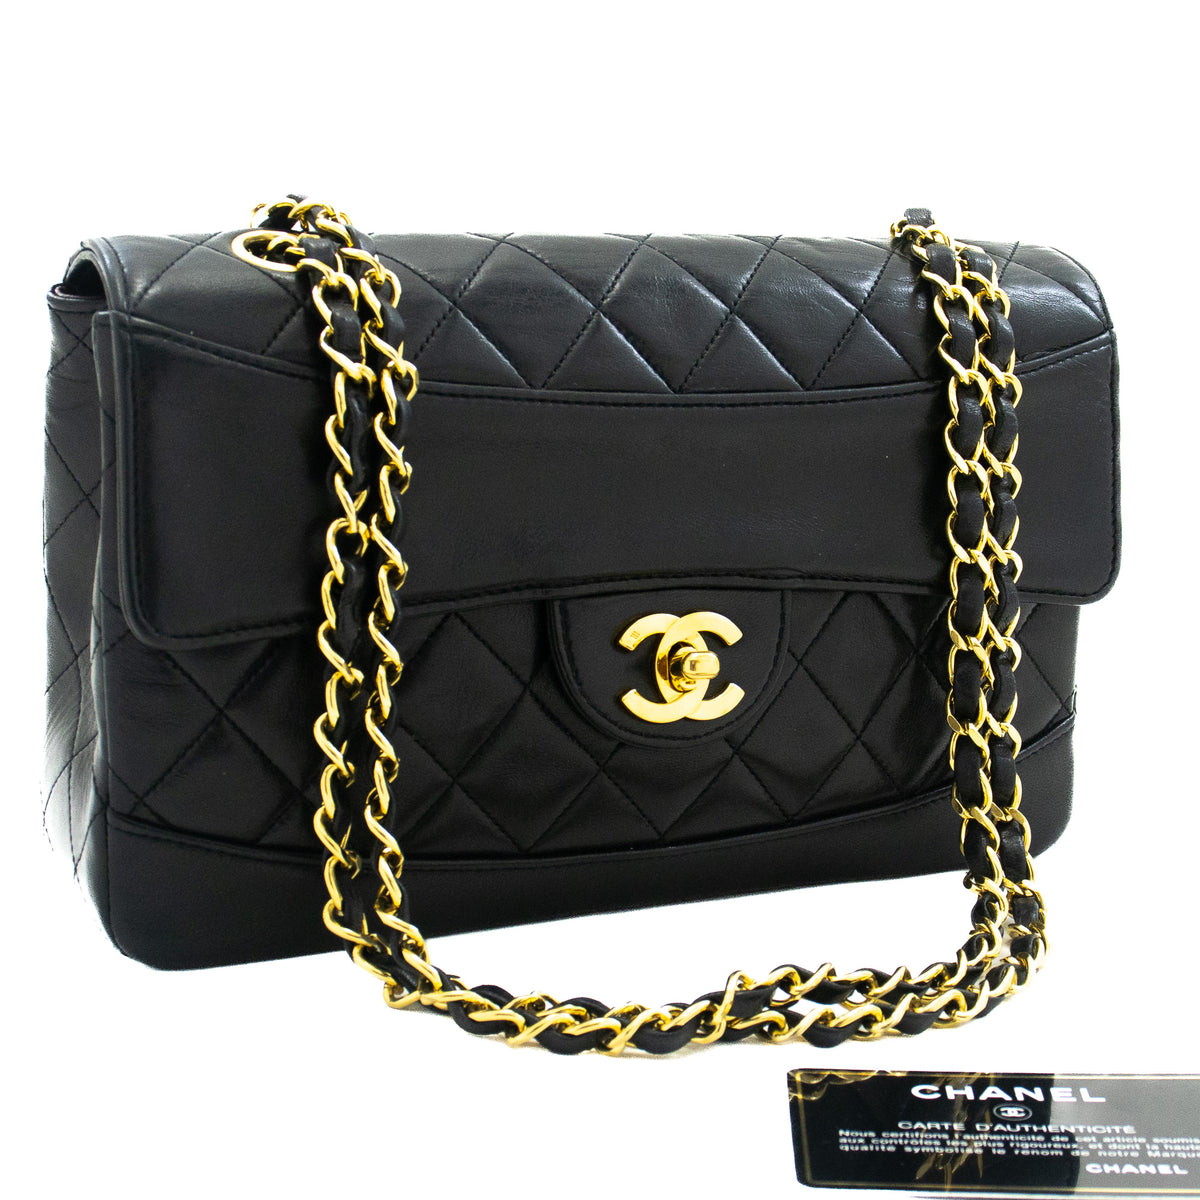 CHANEL Vintage Classic Chain Shoulder Bag Flap Quilted